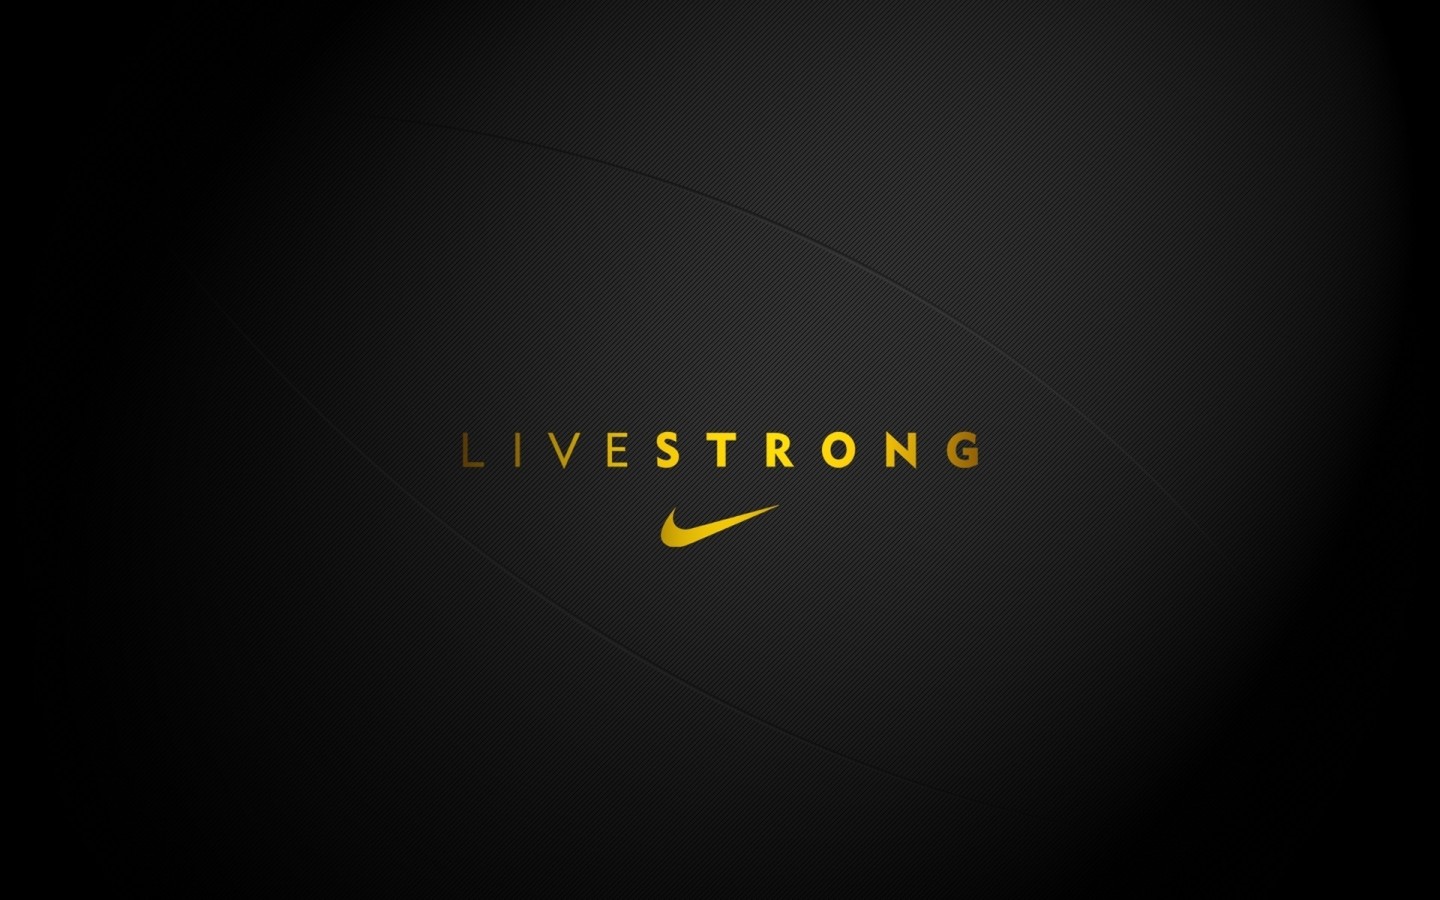 Live Strong Nike 1440x900